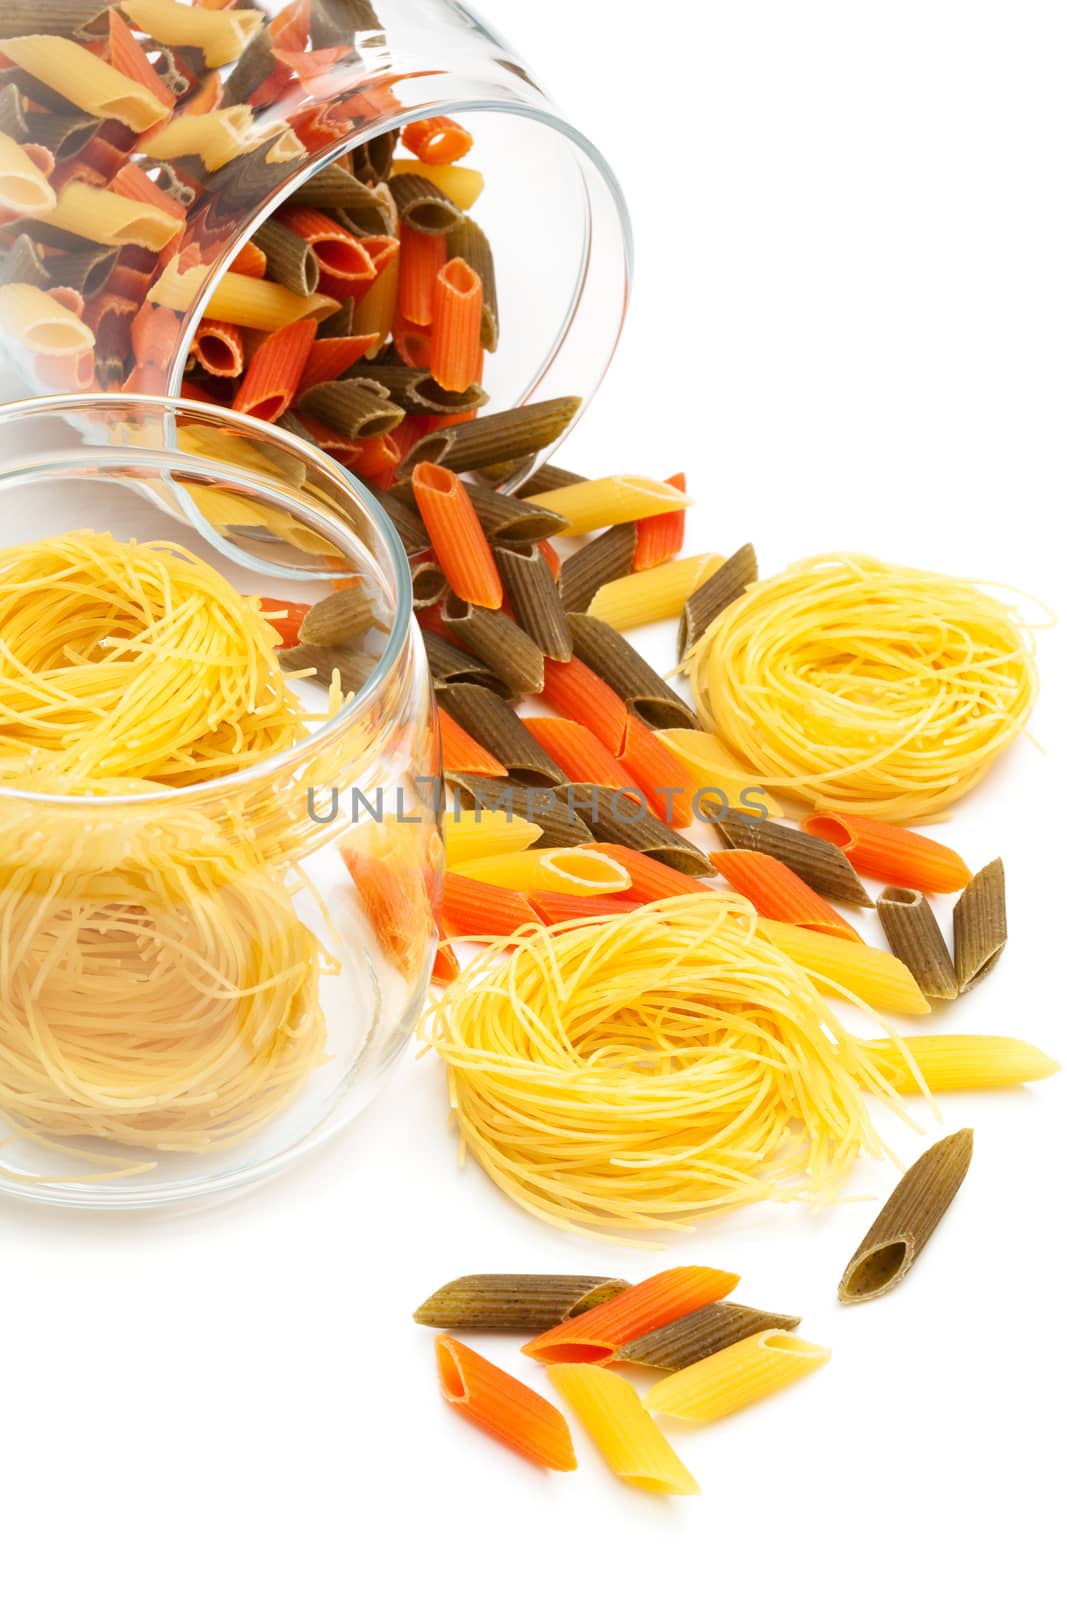 pasta in glass jar by terex